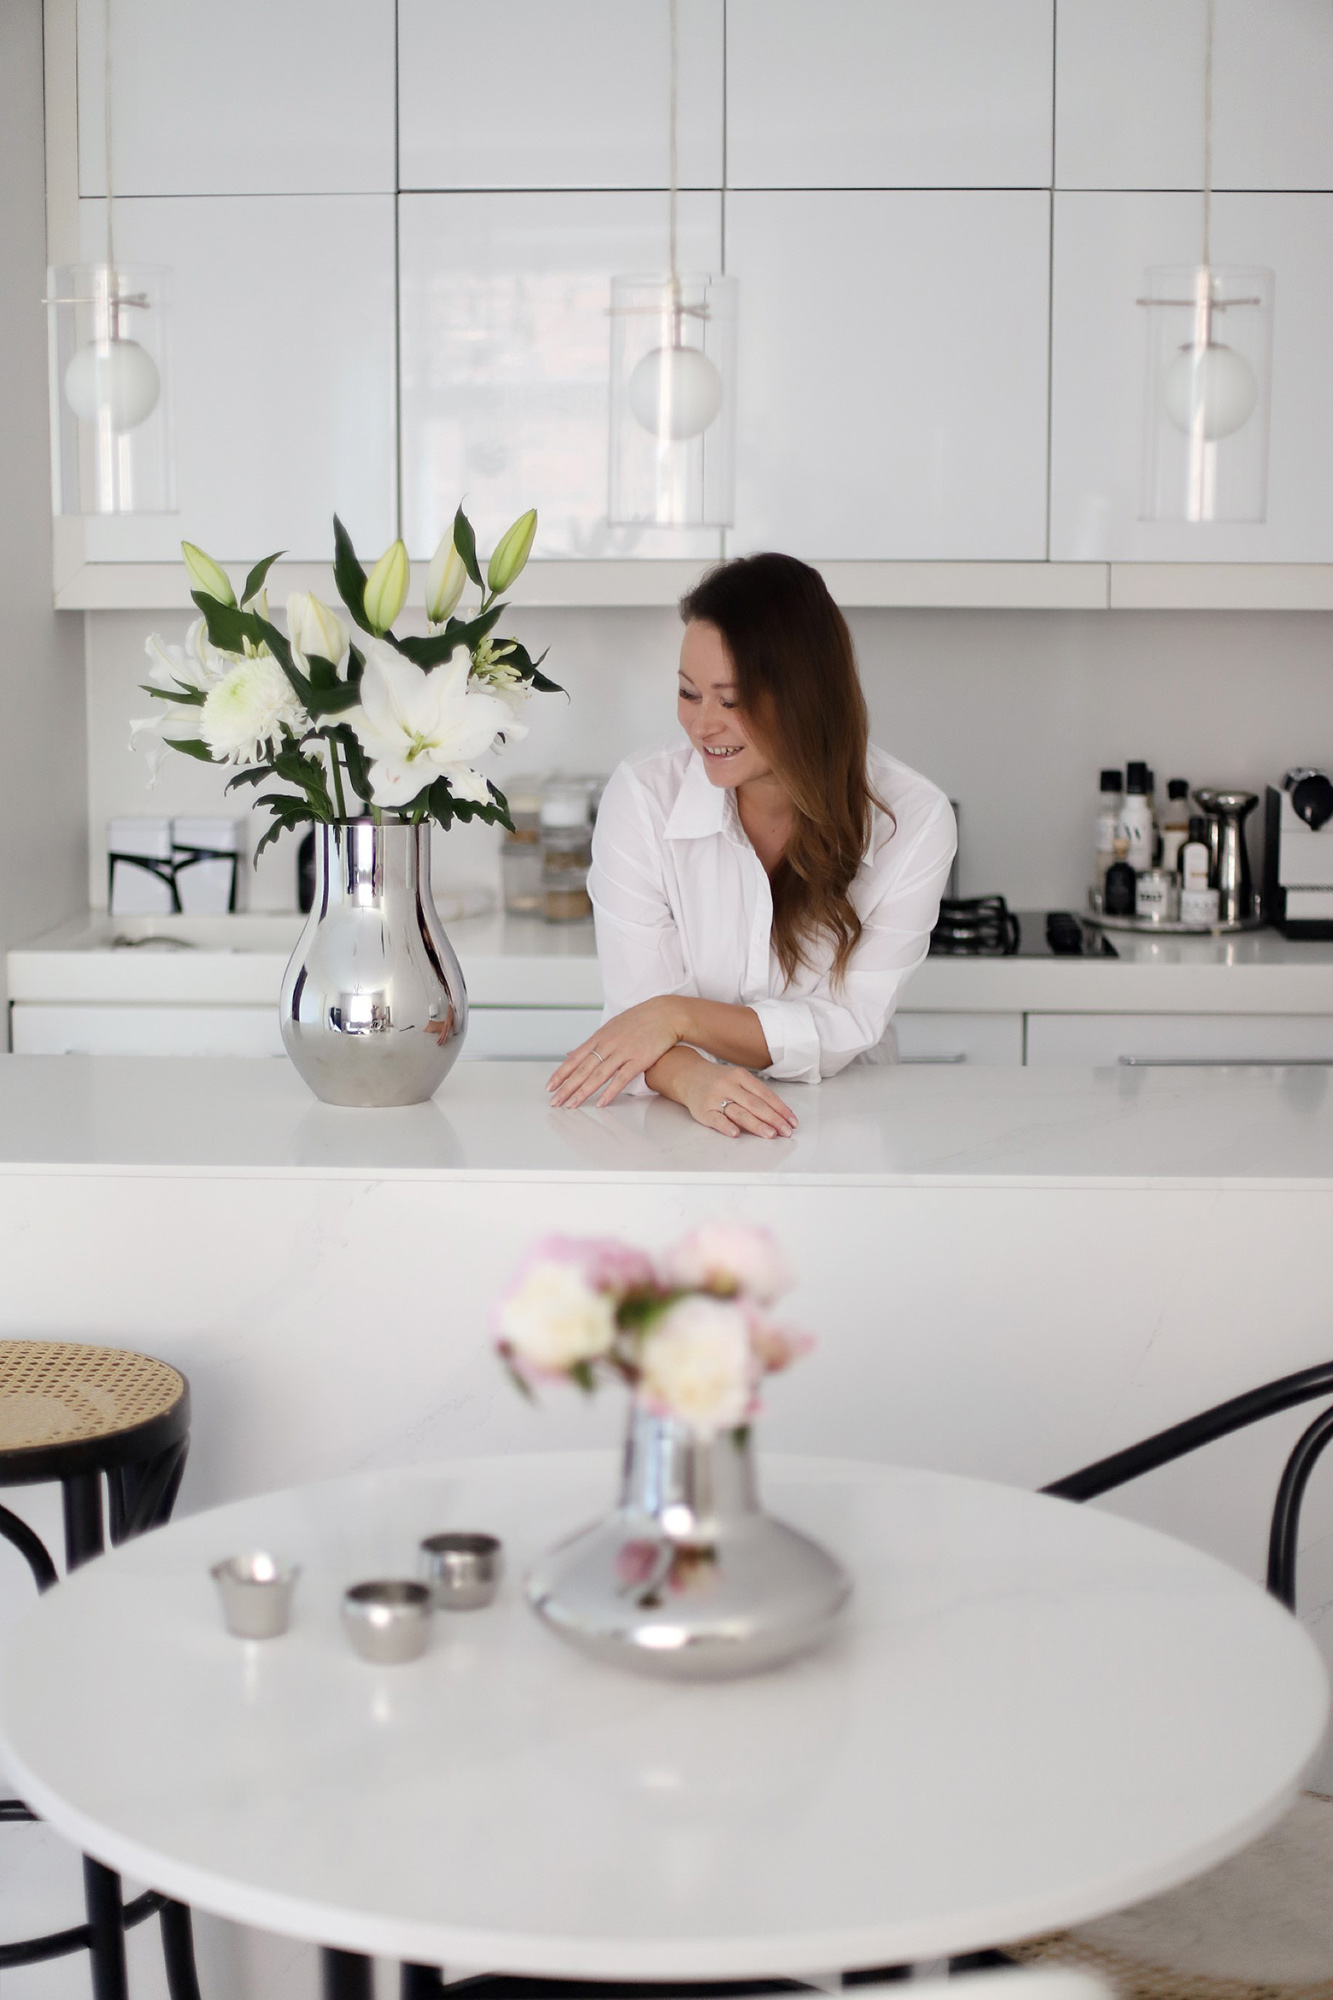 Image of Charandthecity Silestone Calacatta Gold 2 in Silestone revamps the kitchen and dining room of influencer Carita Alfthan - Cosentino